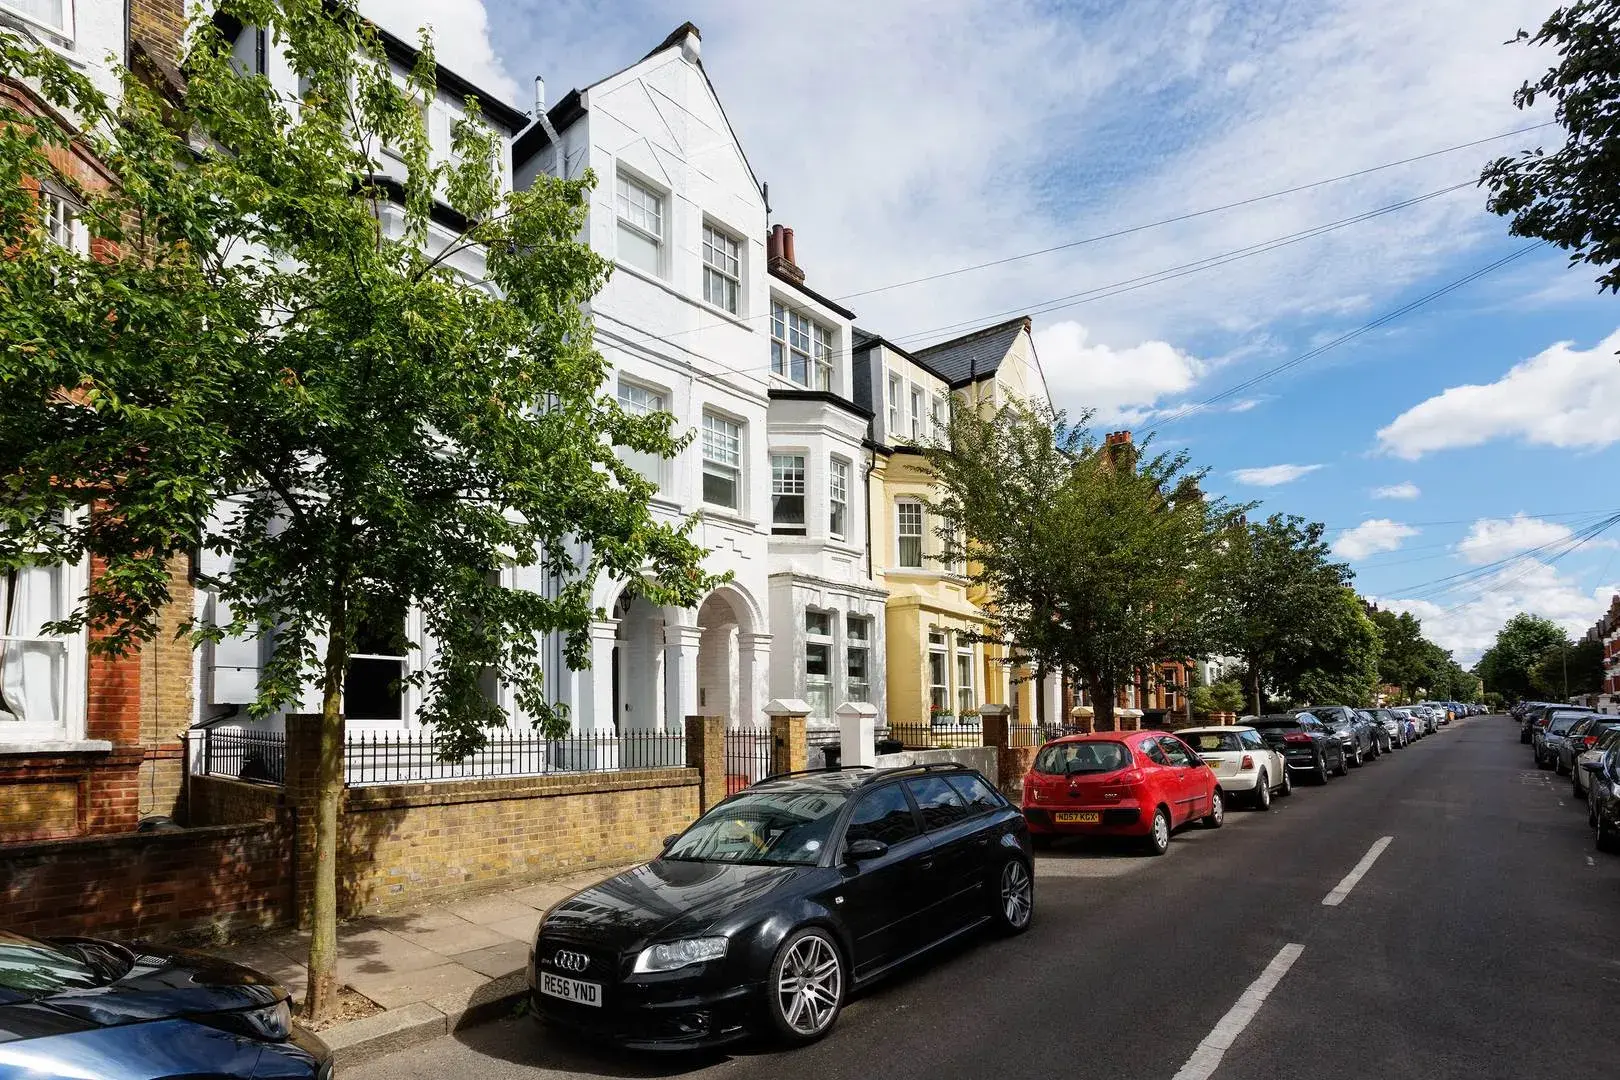 Schubert Road, holiday home in Putney, London